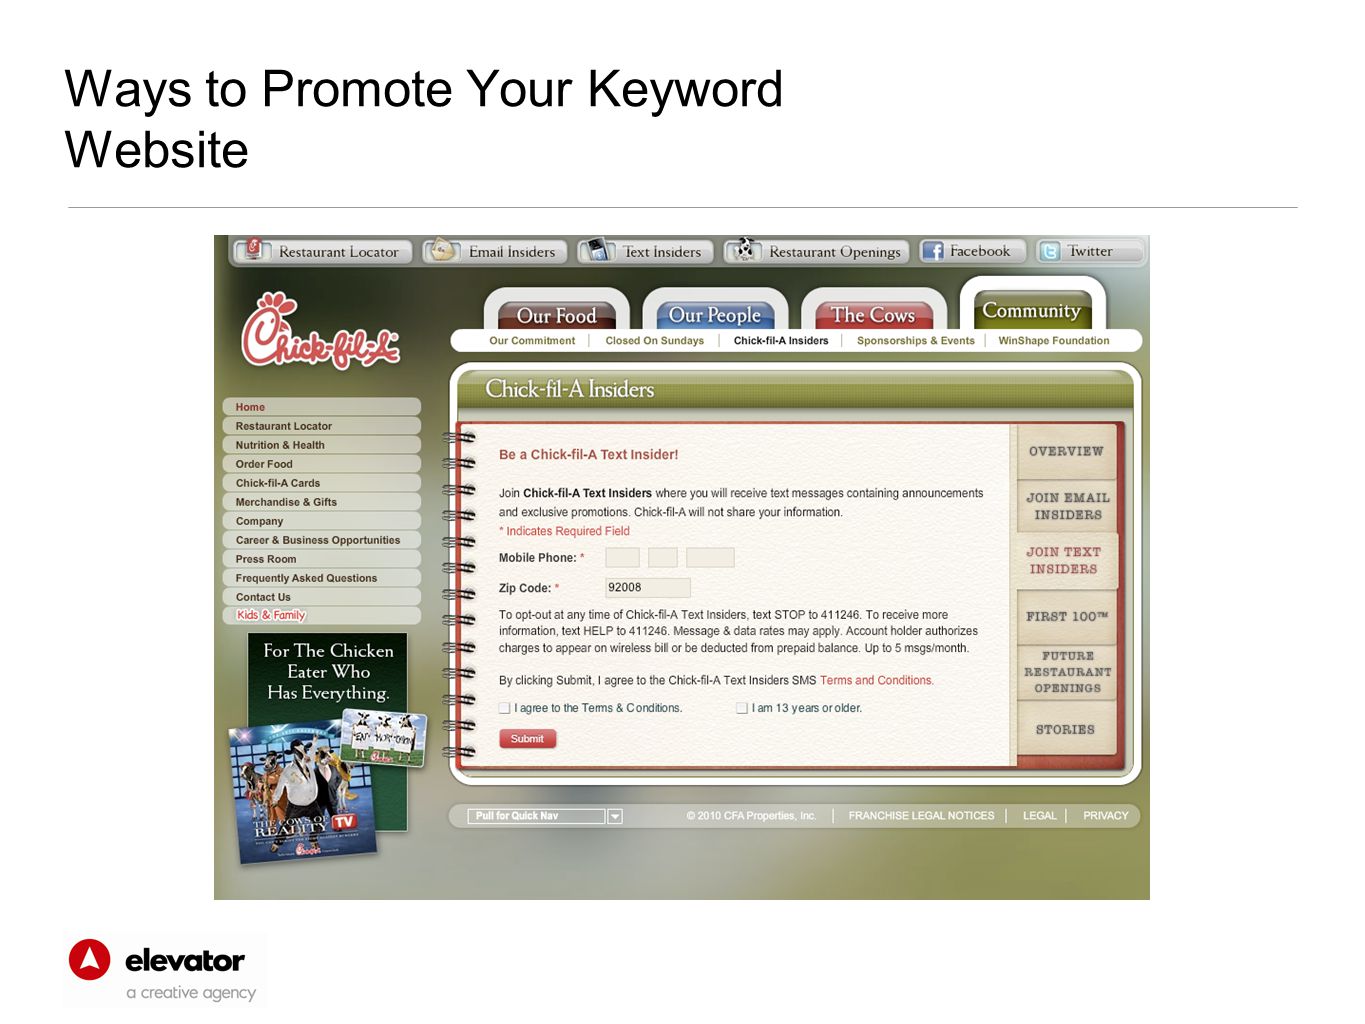 Ways to Promote Your Keyword Website